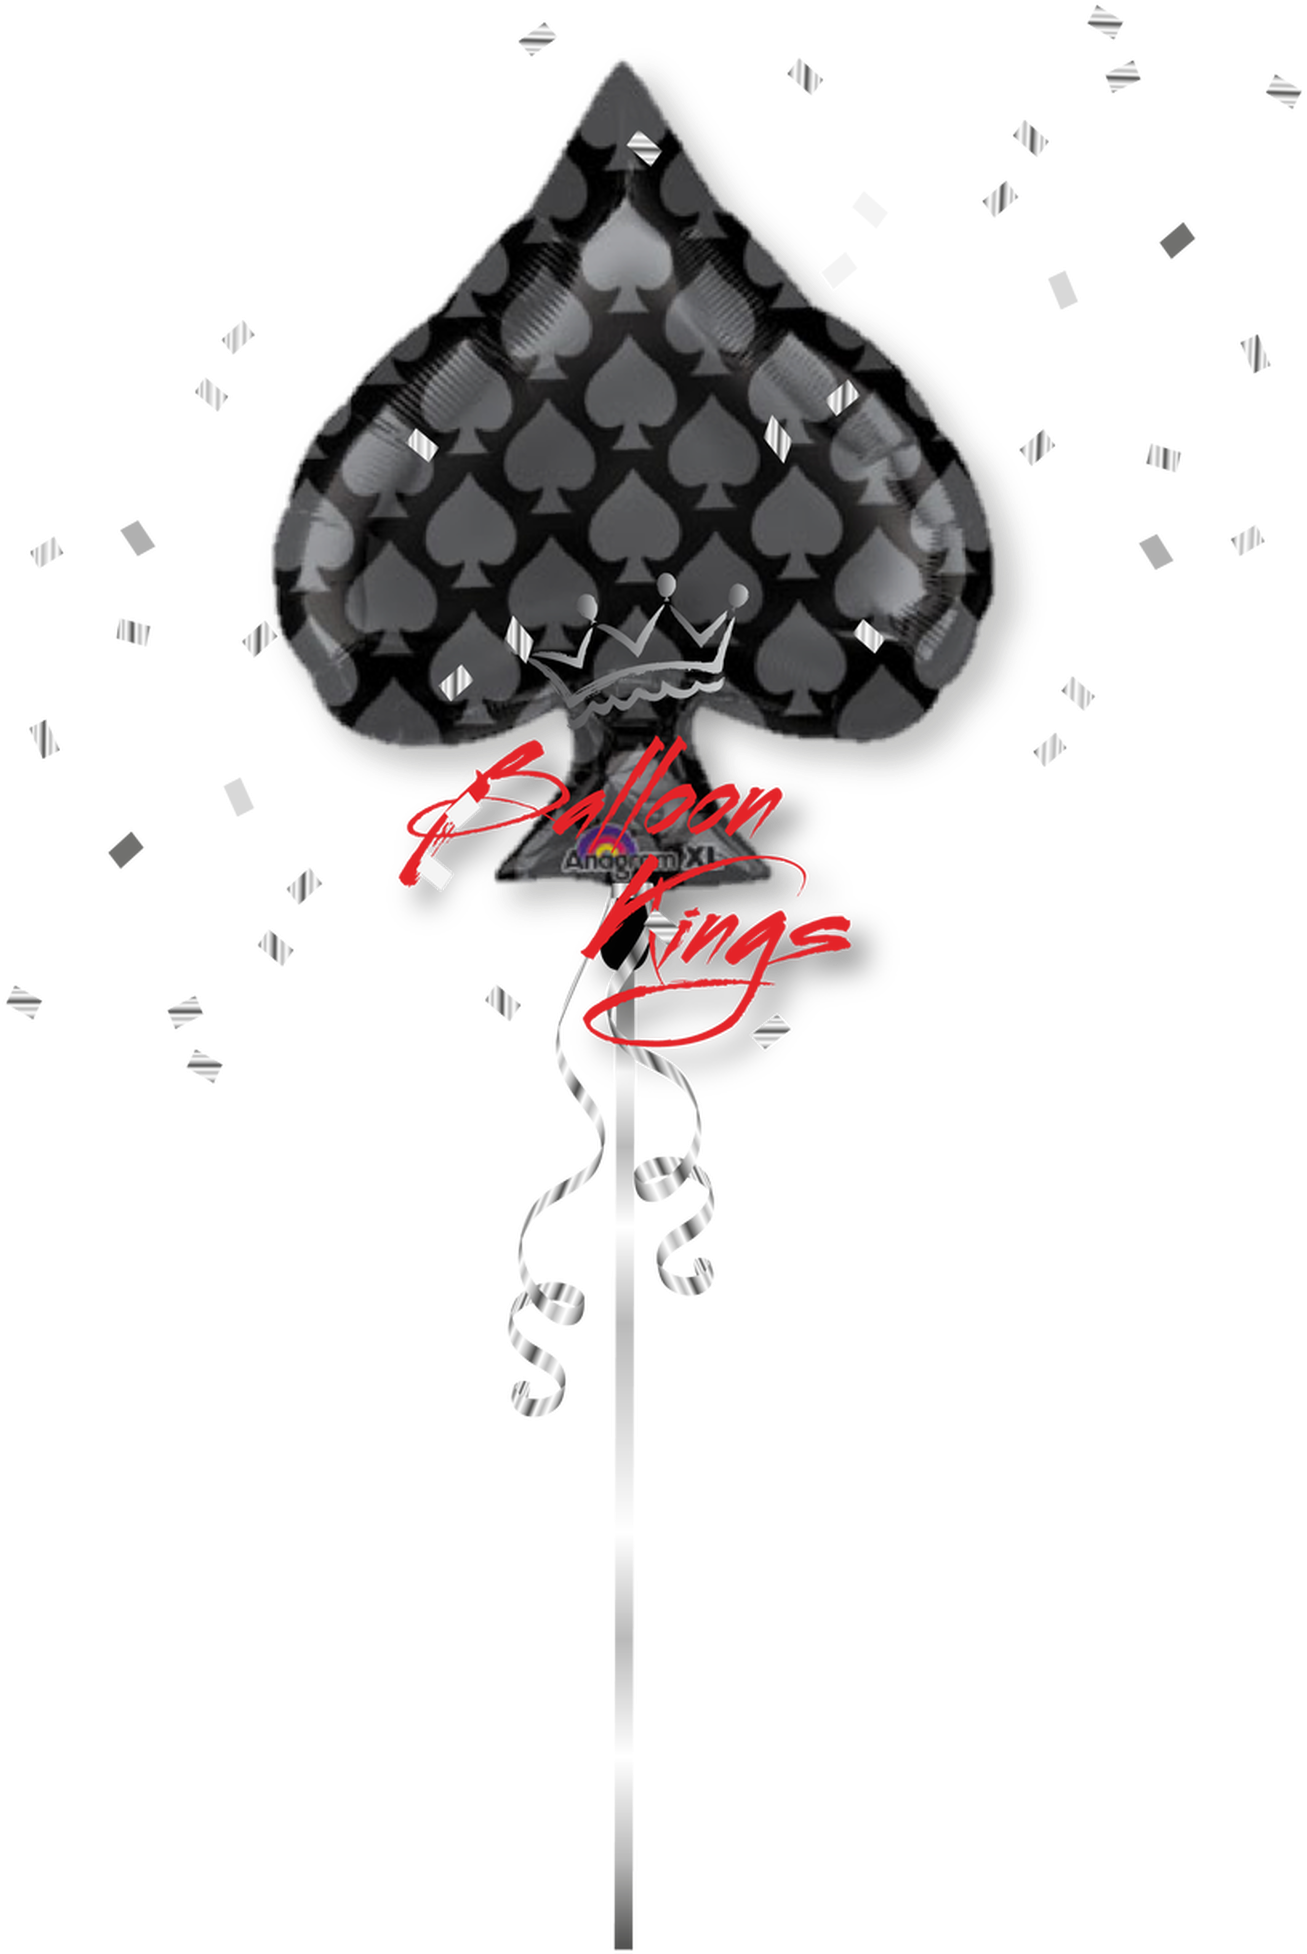 A Balloon In The Shape Of A Card With A Black Background